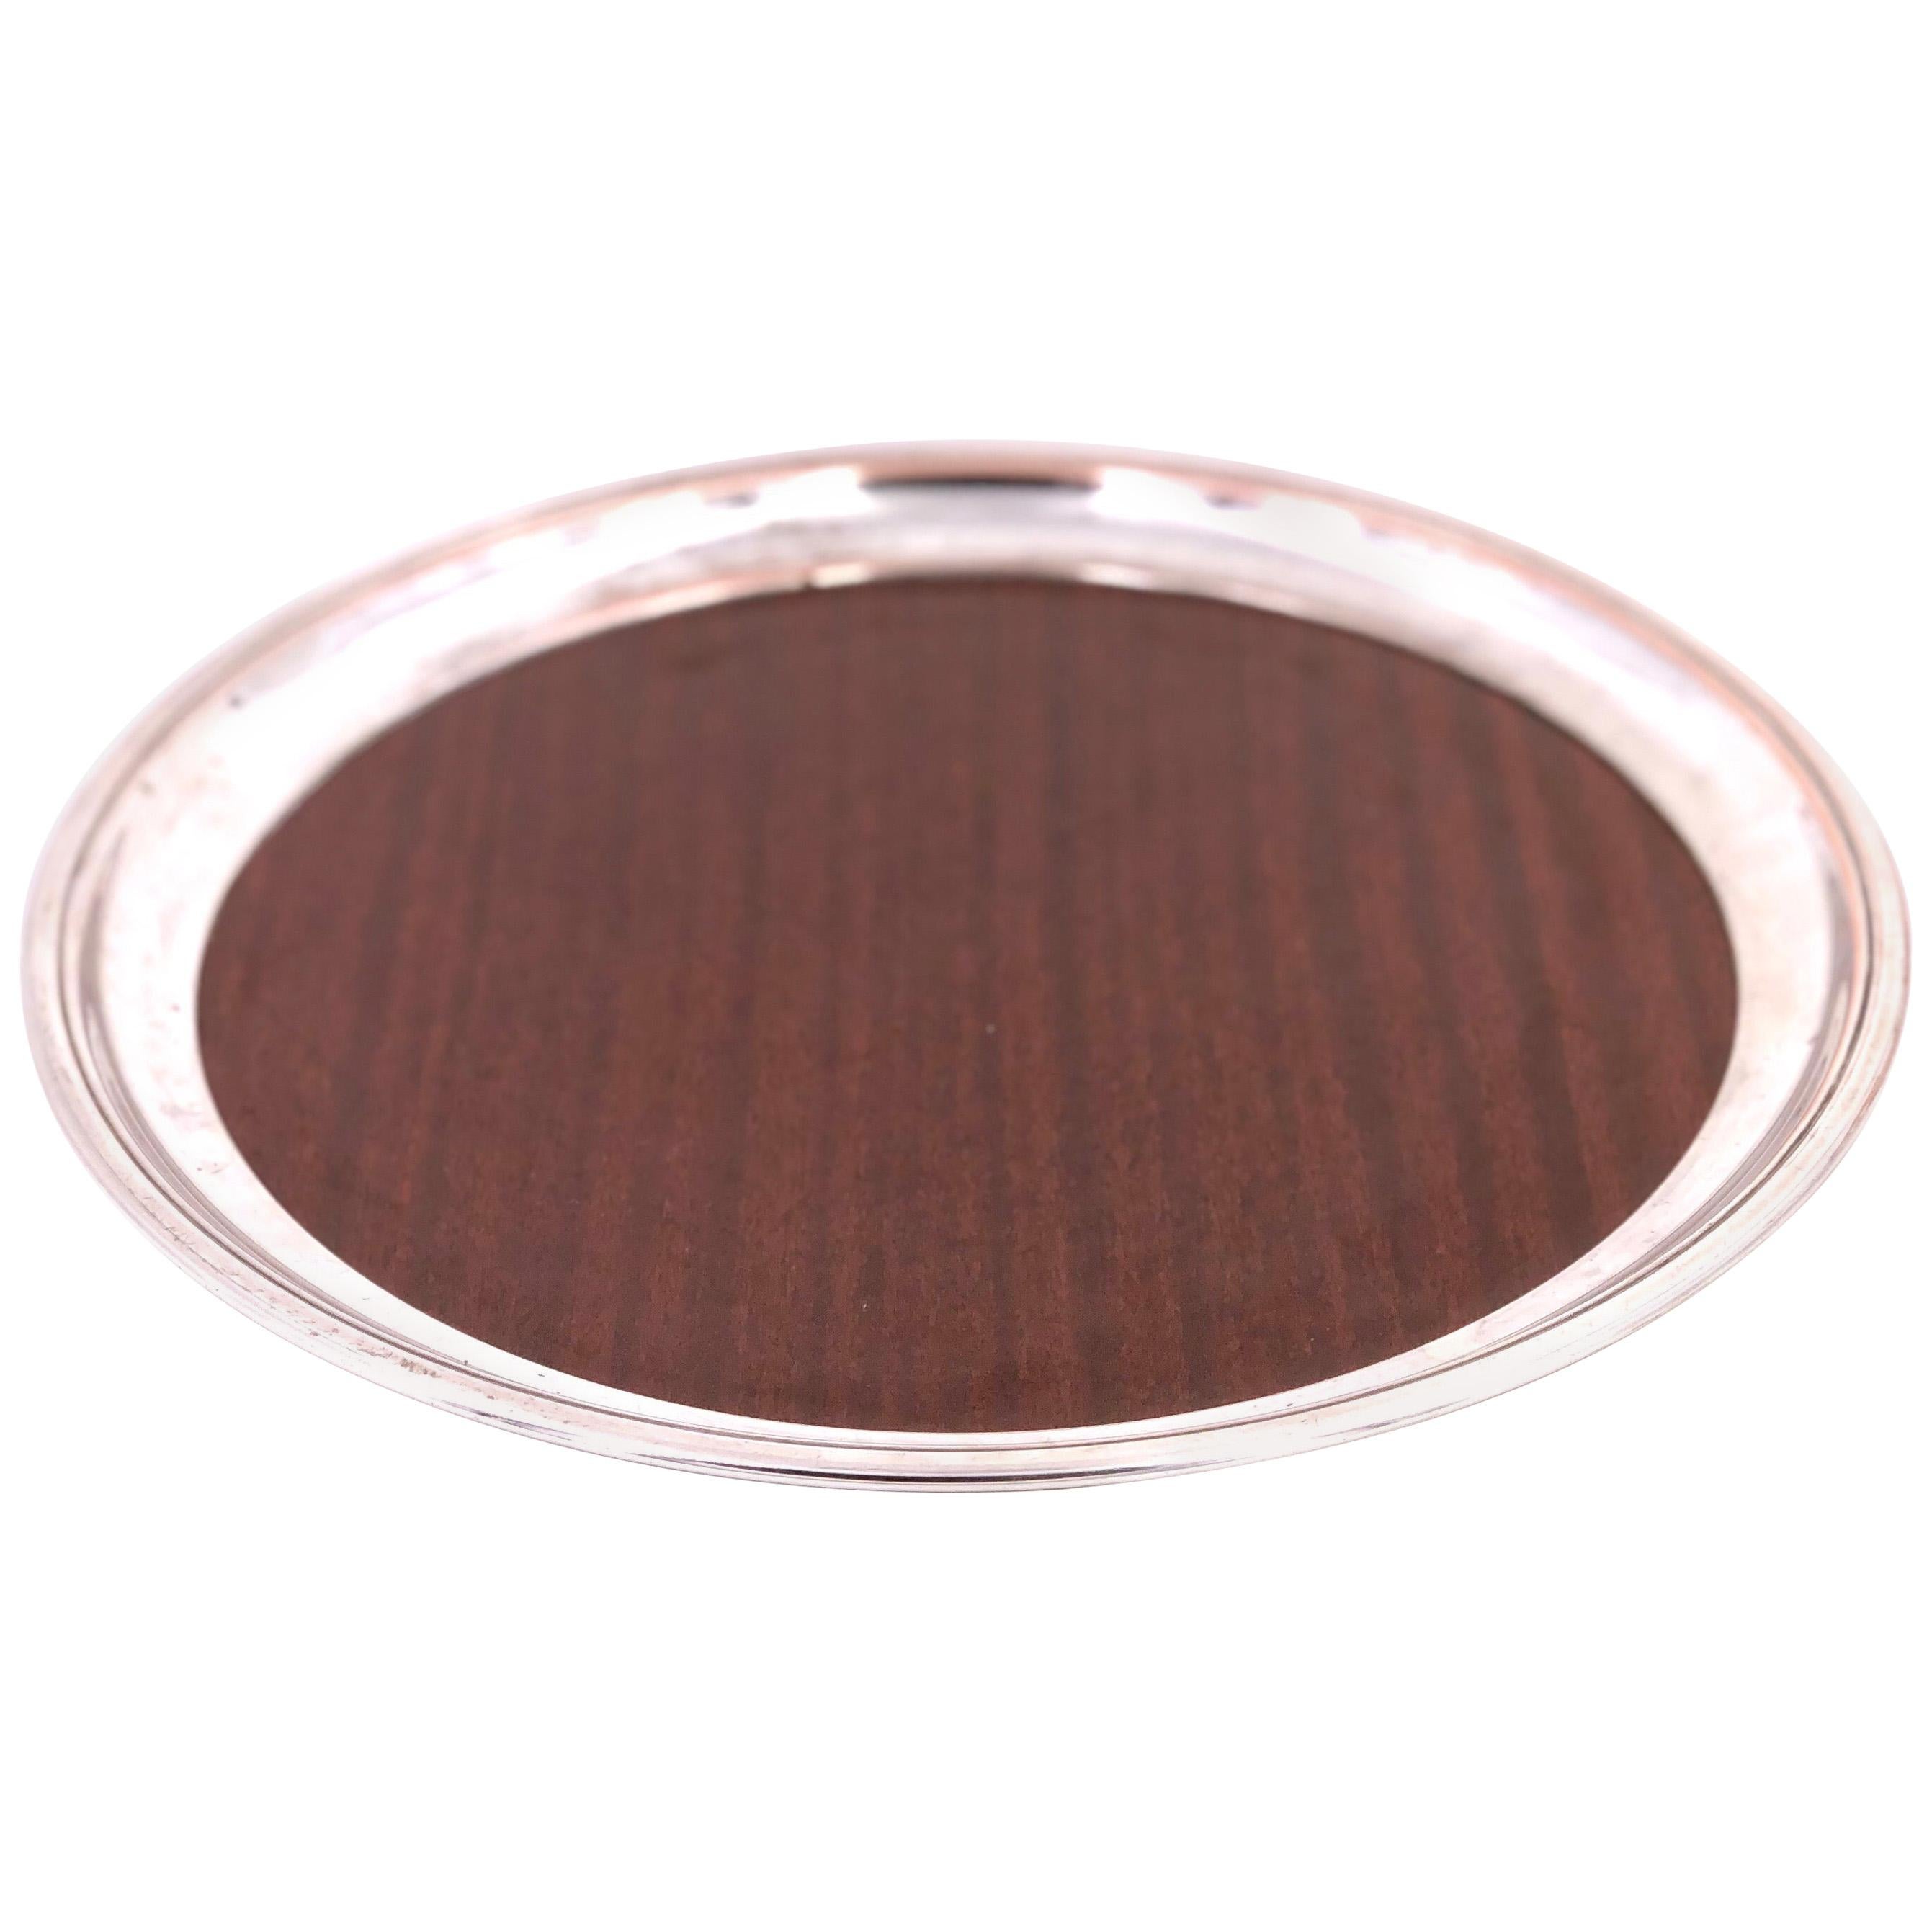 Art Deco Round Silver Plated Tray with Faux Rosewood Laminate